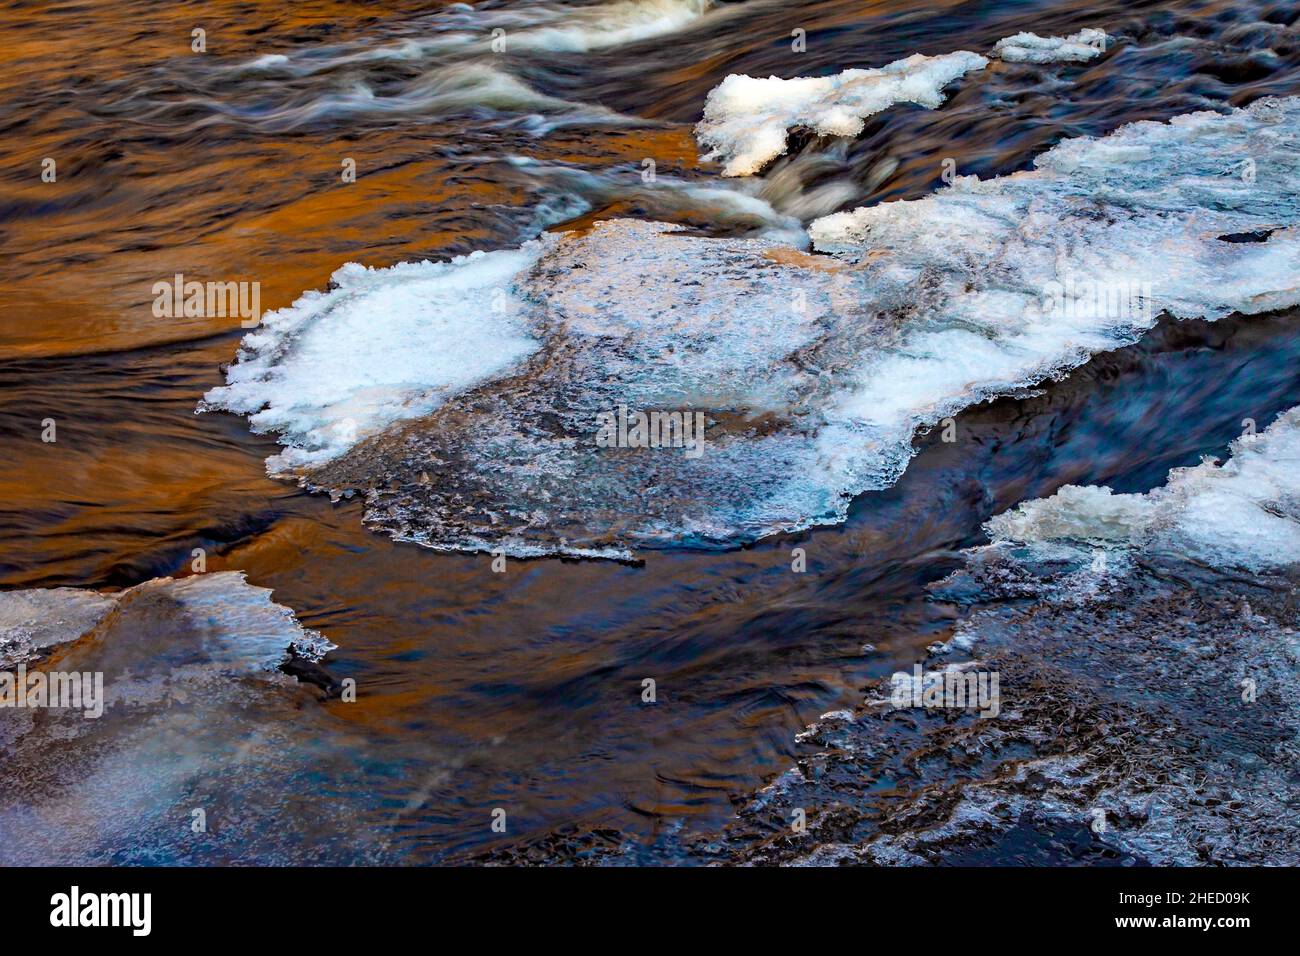 Ice and late afternoon reflections on Tobyhanna Creek in Pennsylvania's Pocono Mountains in early winter. Stock Photo